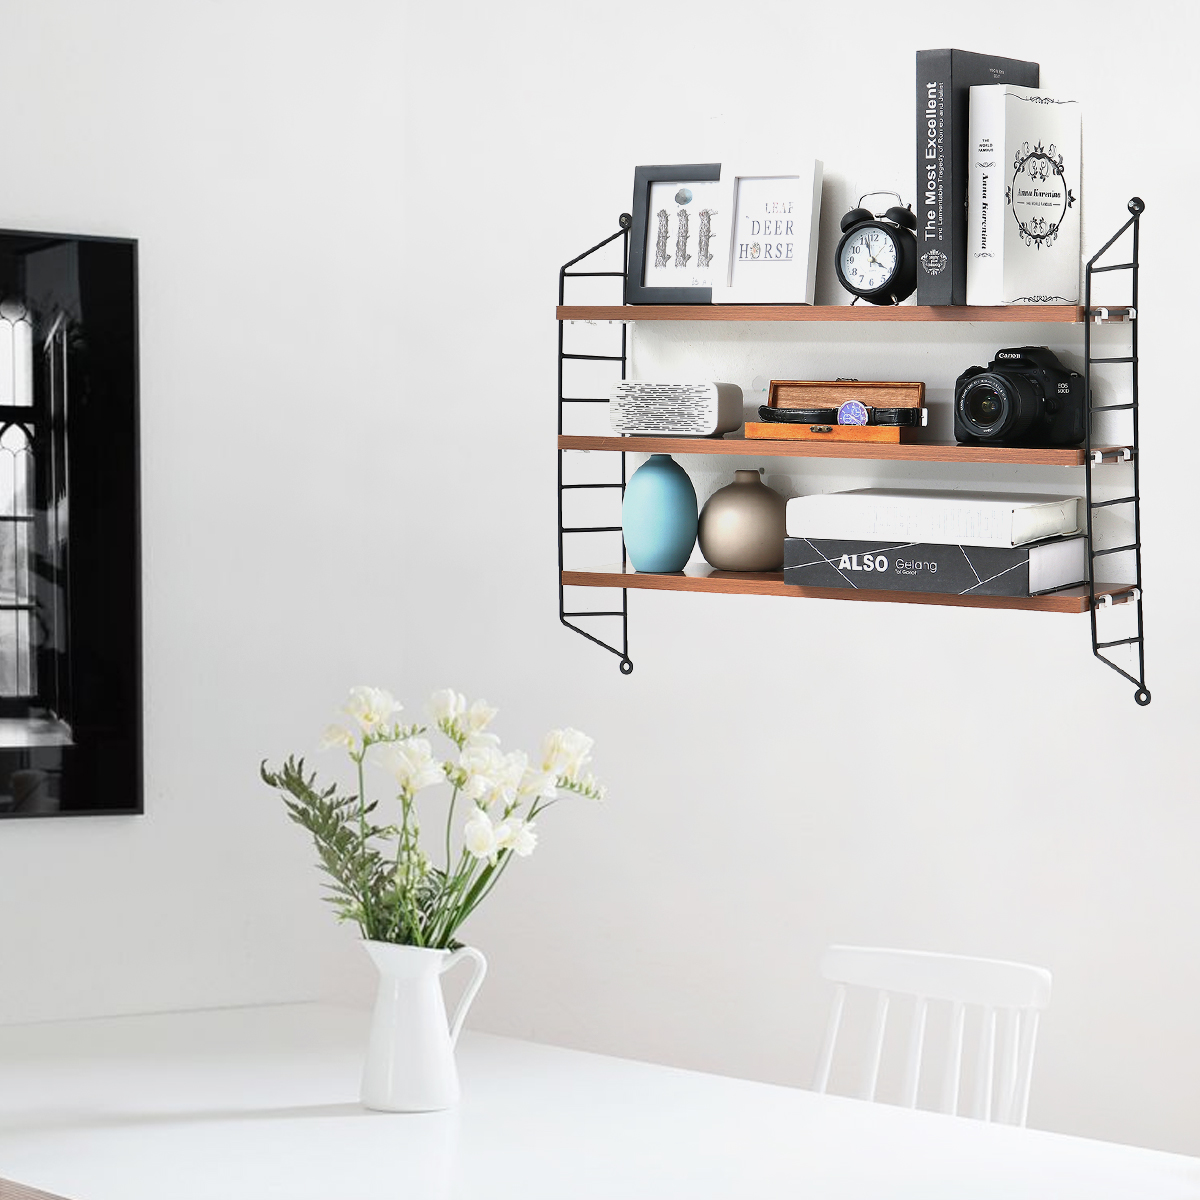 3-Tiers-Wall-Mounted-Shelf-Punch-free-Hanging-Storage-Rack-Bedroom-Bookshelf-Home-Office-Decoration--1788421-12